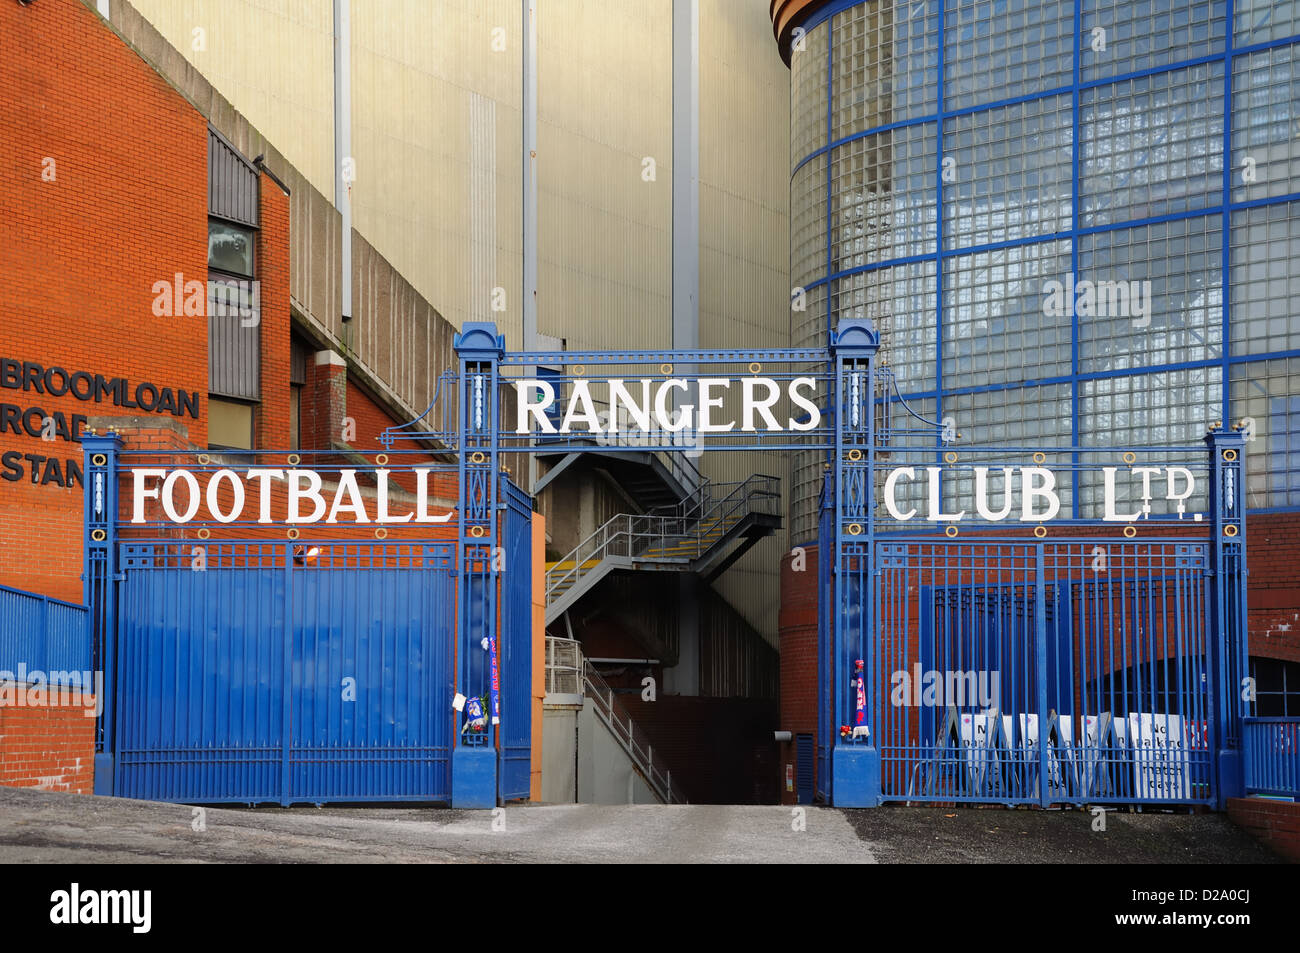 Gate on the west side of main stand of Ibrox stadium, Glasgow Rangers Football Club in Scotland, UK Stock Photo